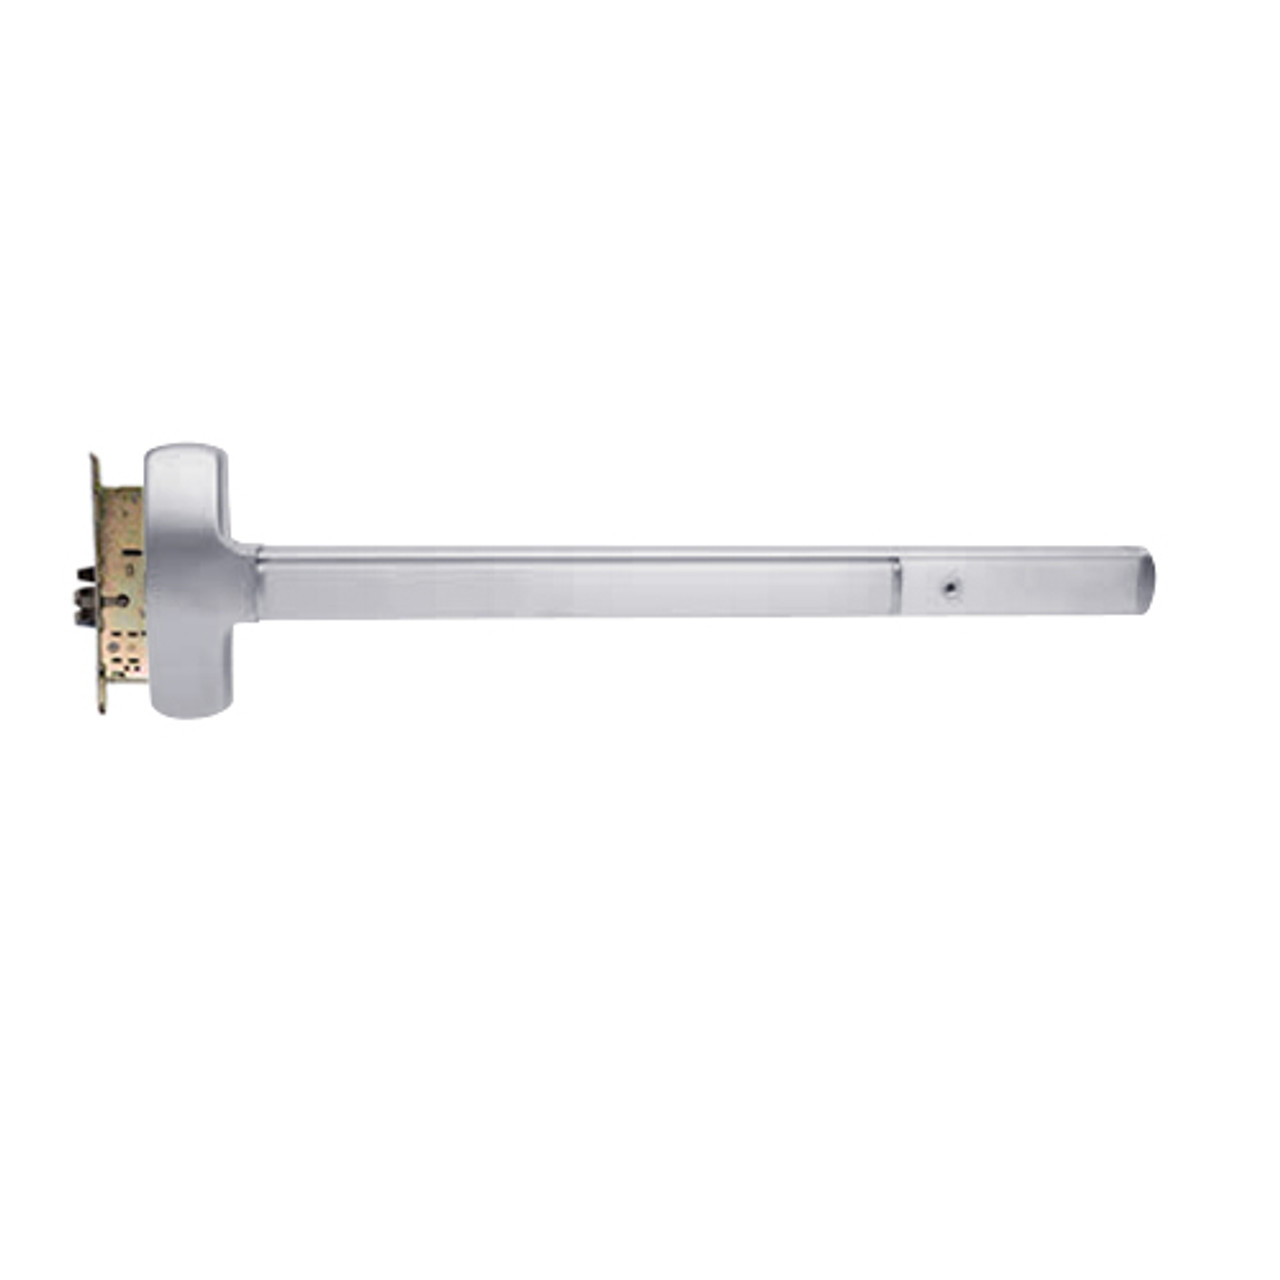 25-M-NL-OP-US32-4-LHR Falcon Exit Device in Polished Stainless Steel